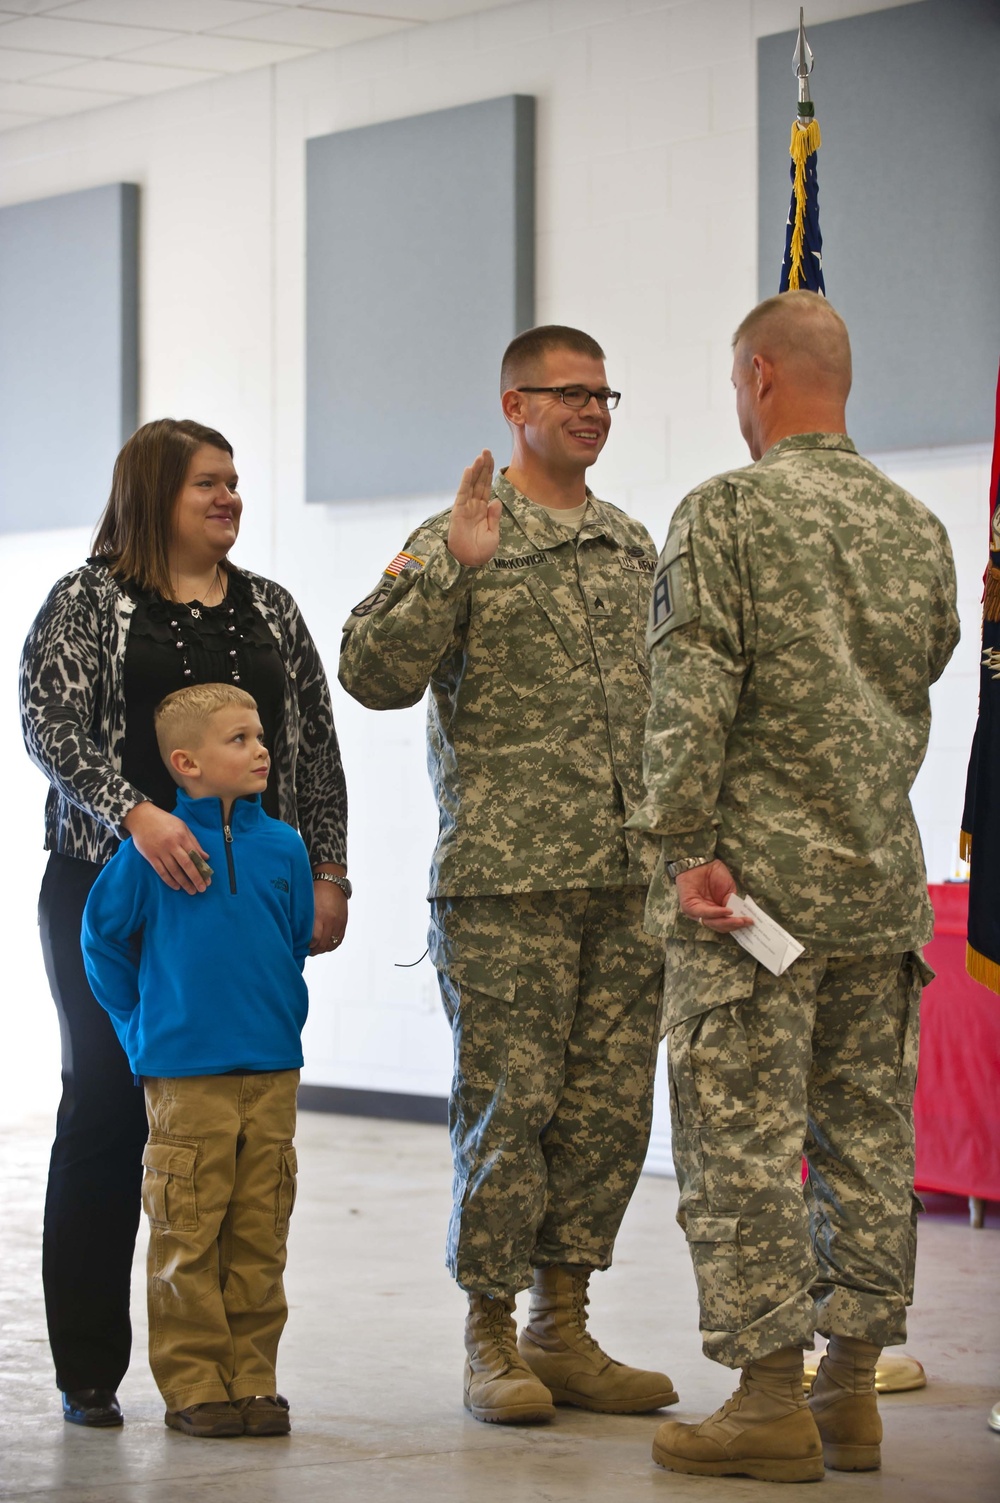 205th Infantry Brigade NCO receives direct commission to officer